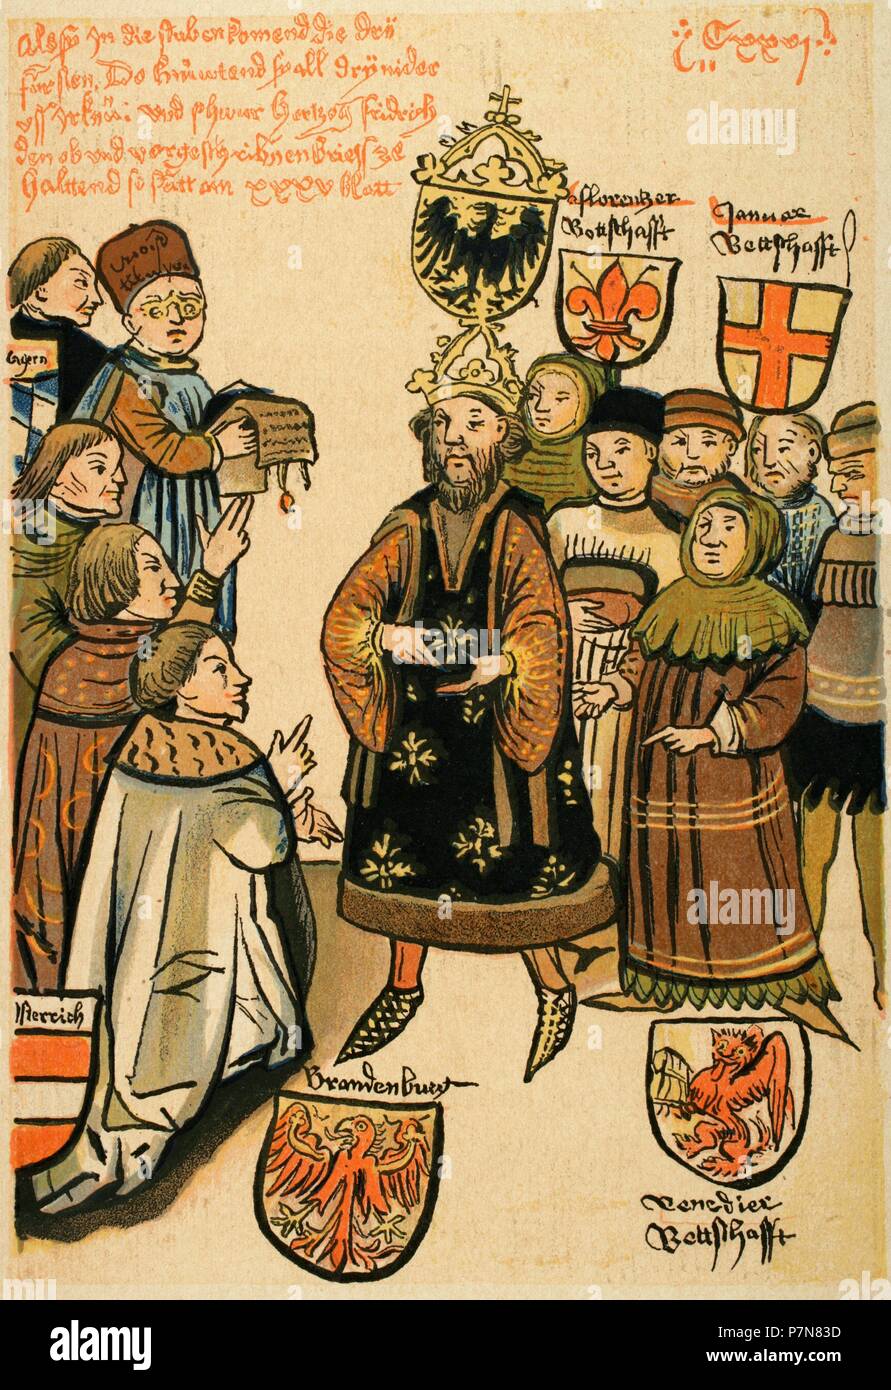 Frederick I, Elector of Brandenburg (1371-1440). Burgrave of Nuremberg as Frederick VI. First member of the House of Hohenzollern to rule the Margraviate of Brandenburg. Investiture of Frederick. Copy of an original by Ulrich of Richenthal (15th century). Stock Photo